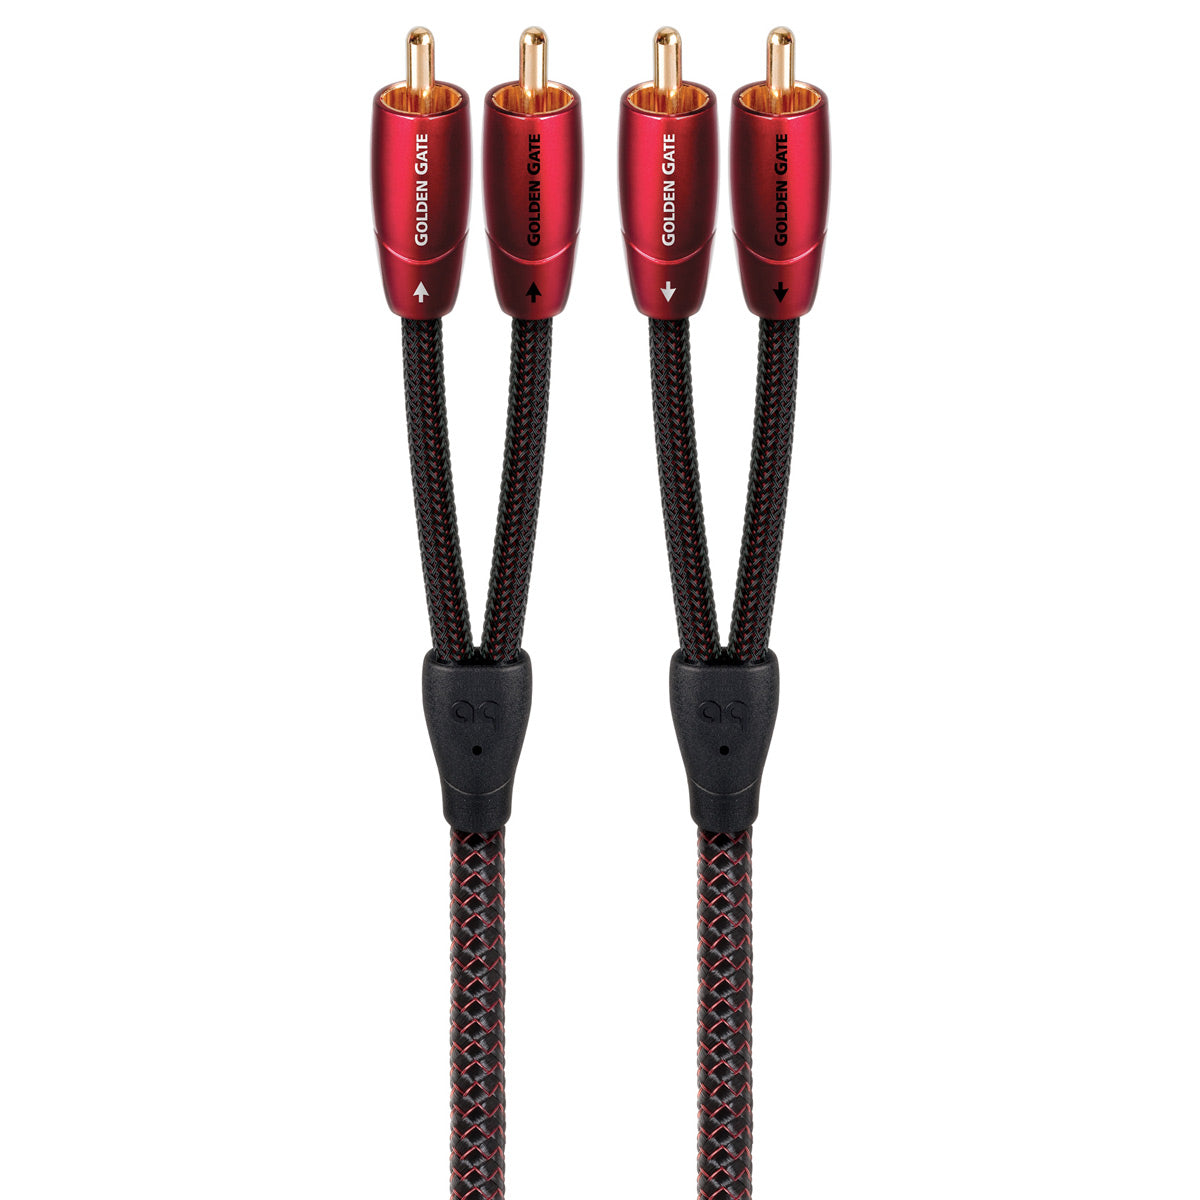 AudioQuest Golden Gate RCA to RCA Analog Interconnect Cable - 0.6 meters